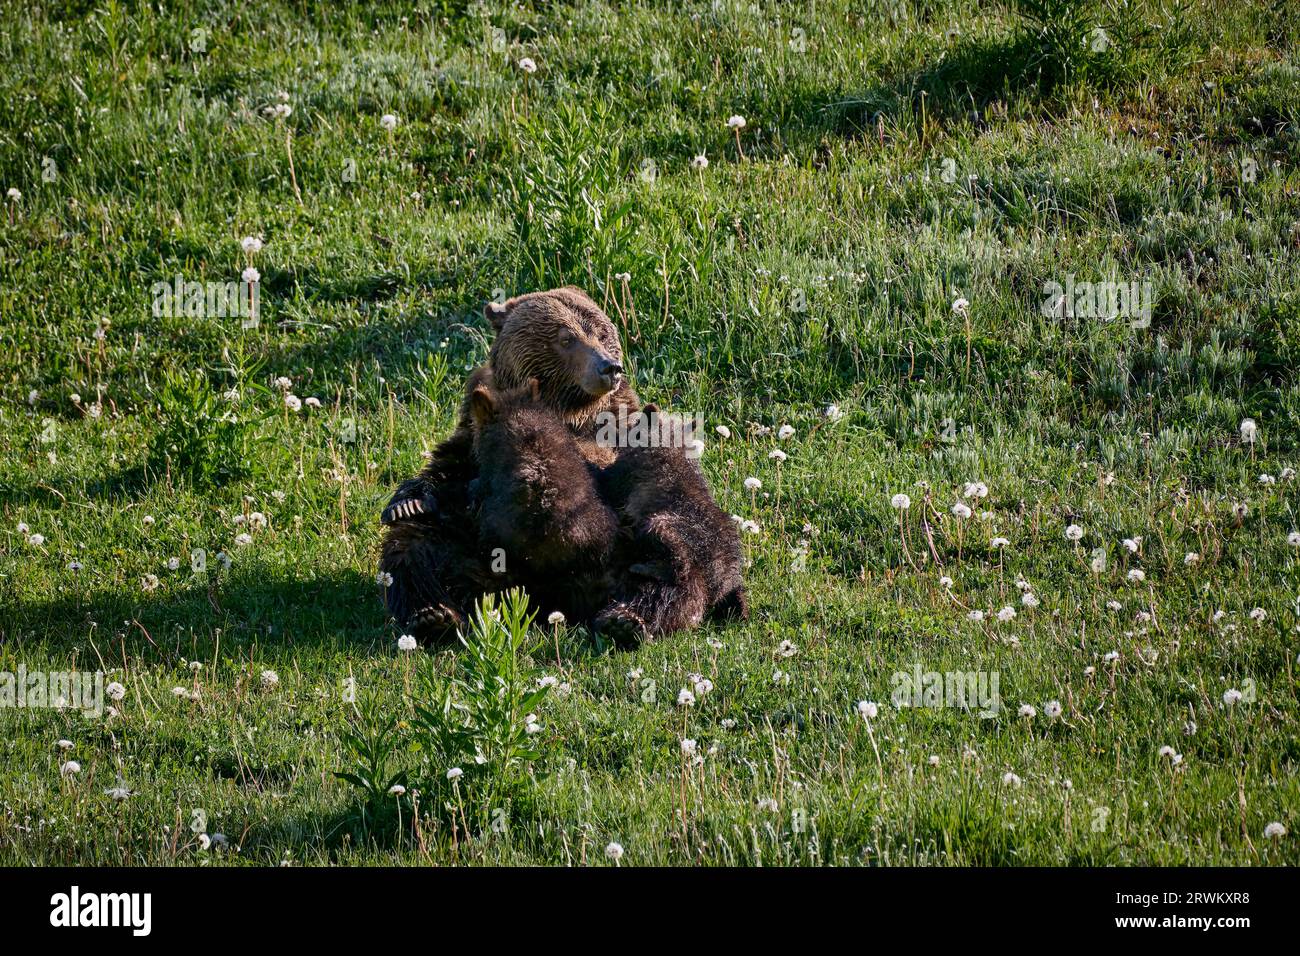 Grizzly bear sow nursing her cubs, Ursus arctos horribilis, Yellowstone National Park, Wyoming, United States of America Stock Photo